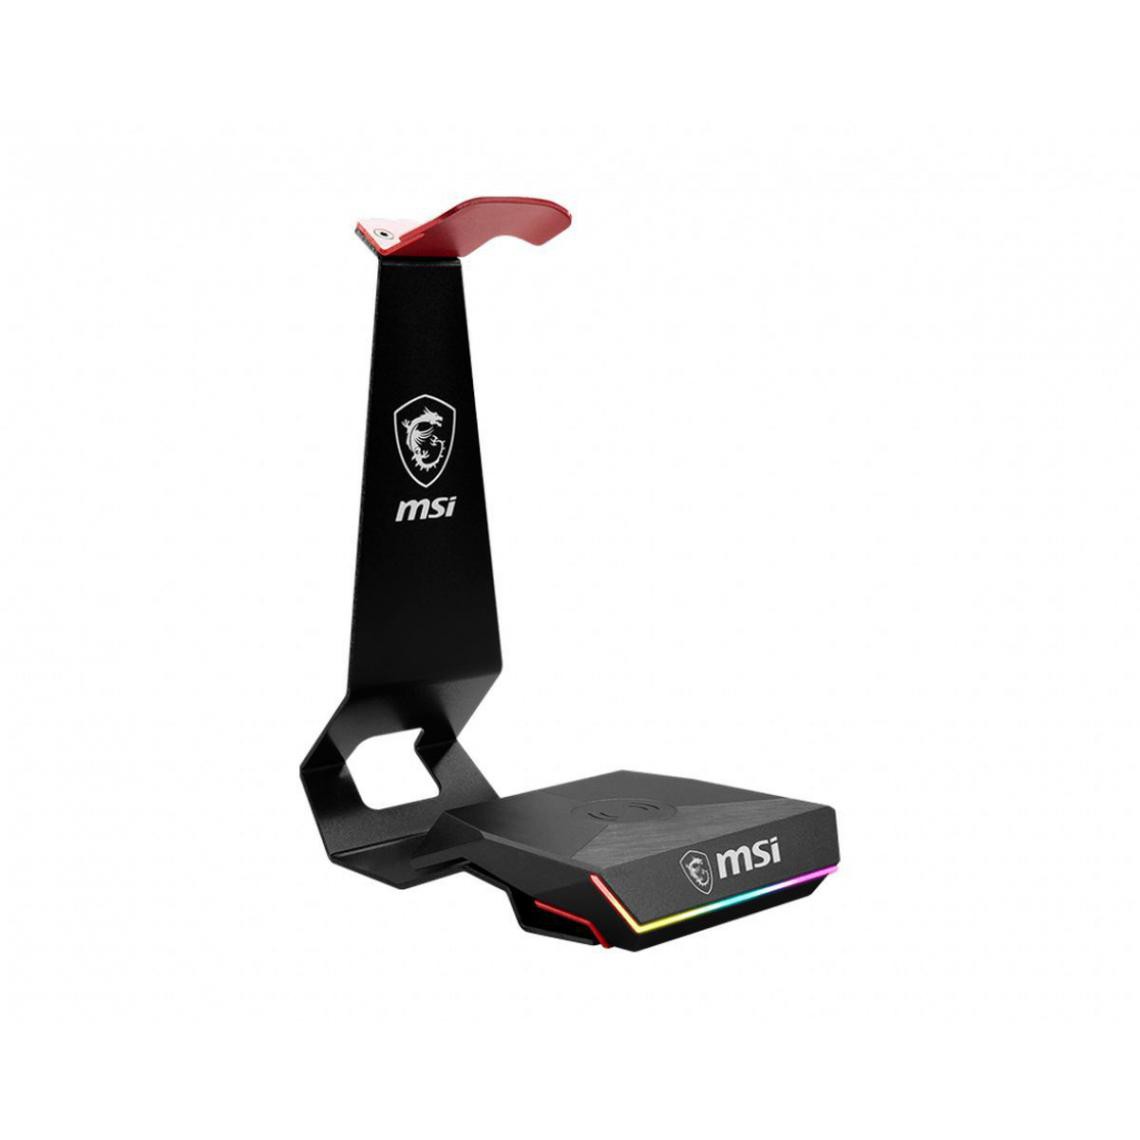 Msi - IMMERSE HS01 COMBO - Support casque gamer